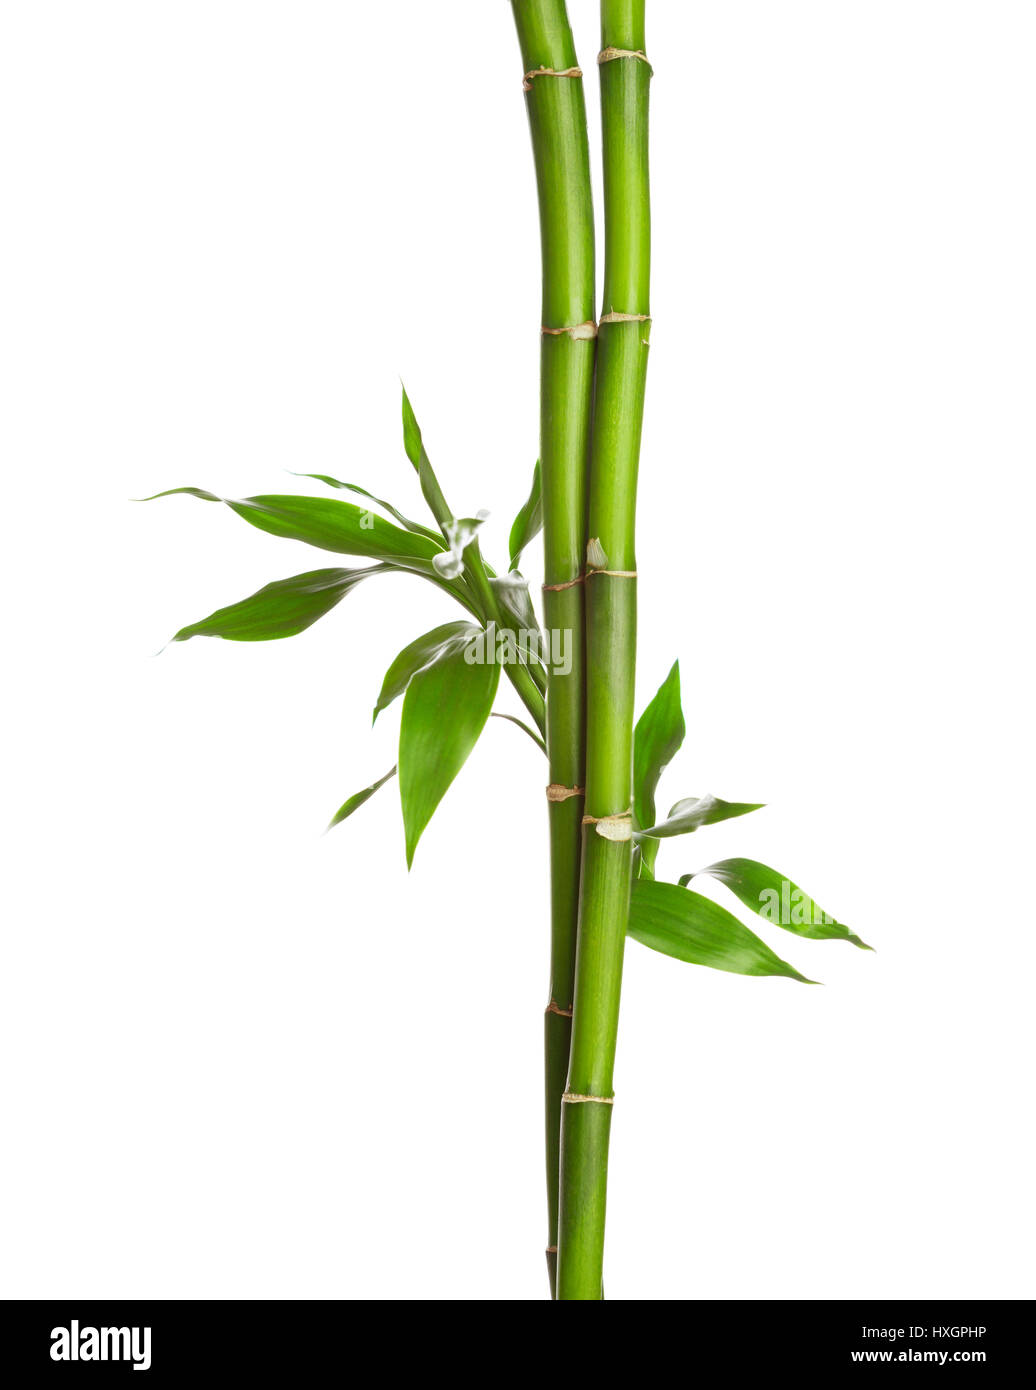 Branches of bamboo isolated on white background. Stock Photo